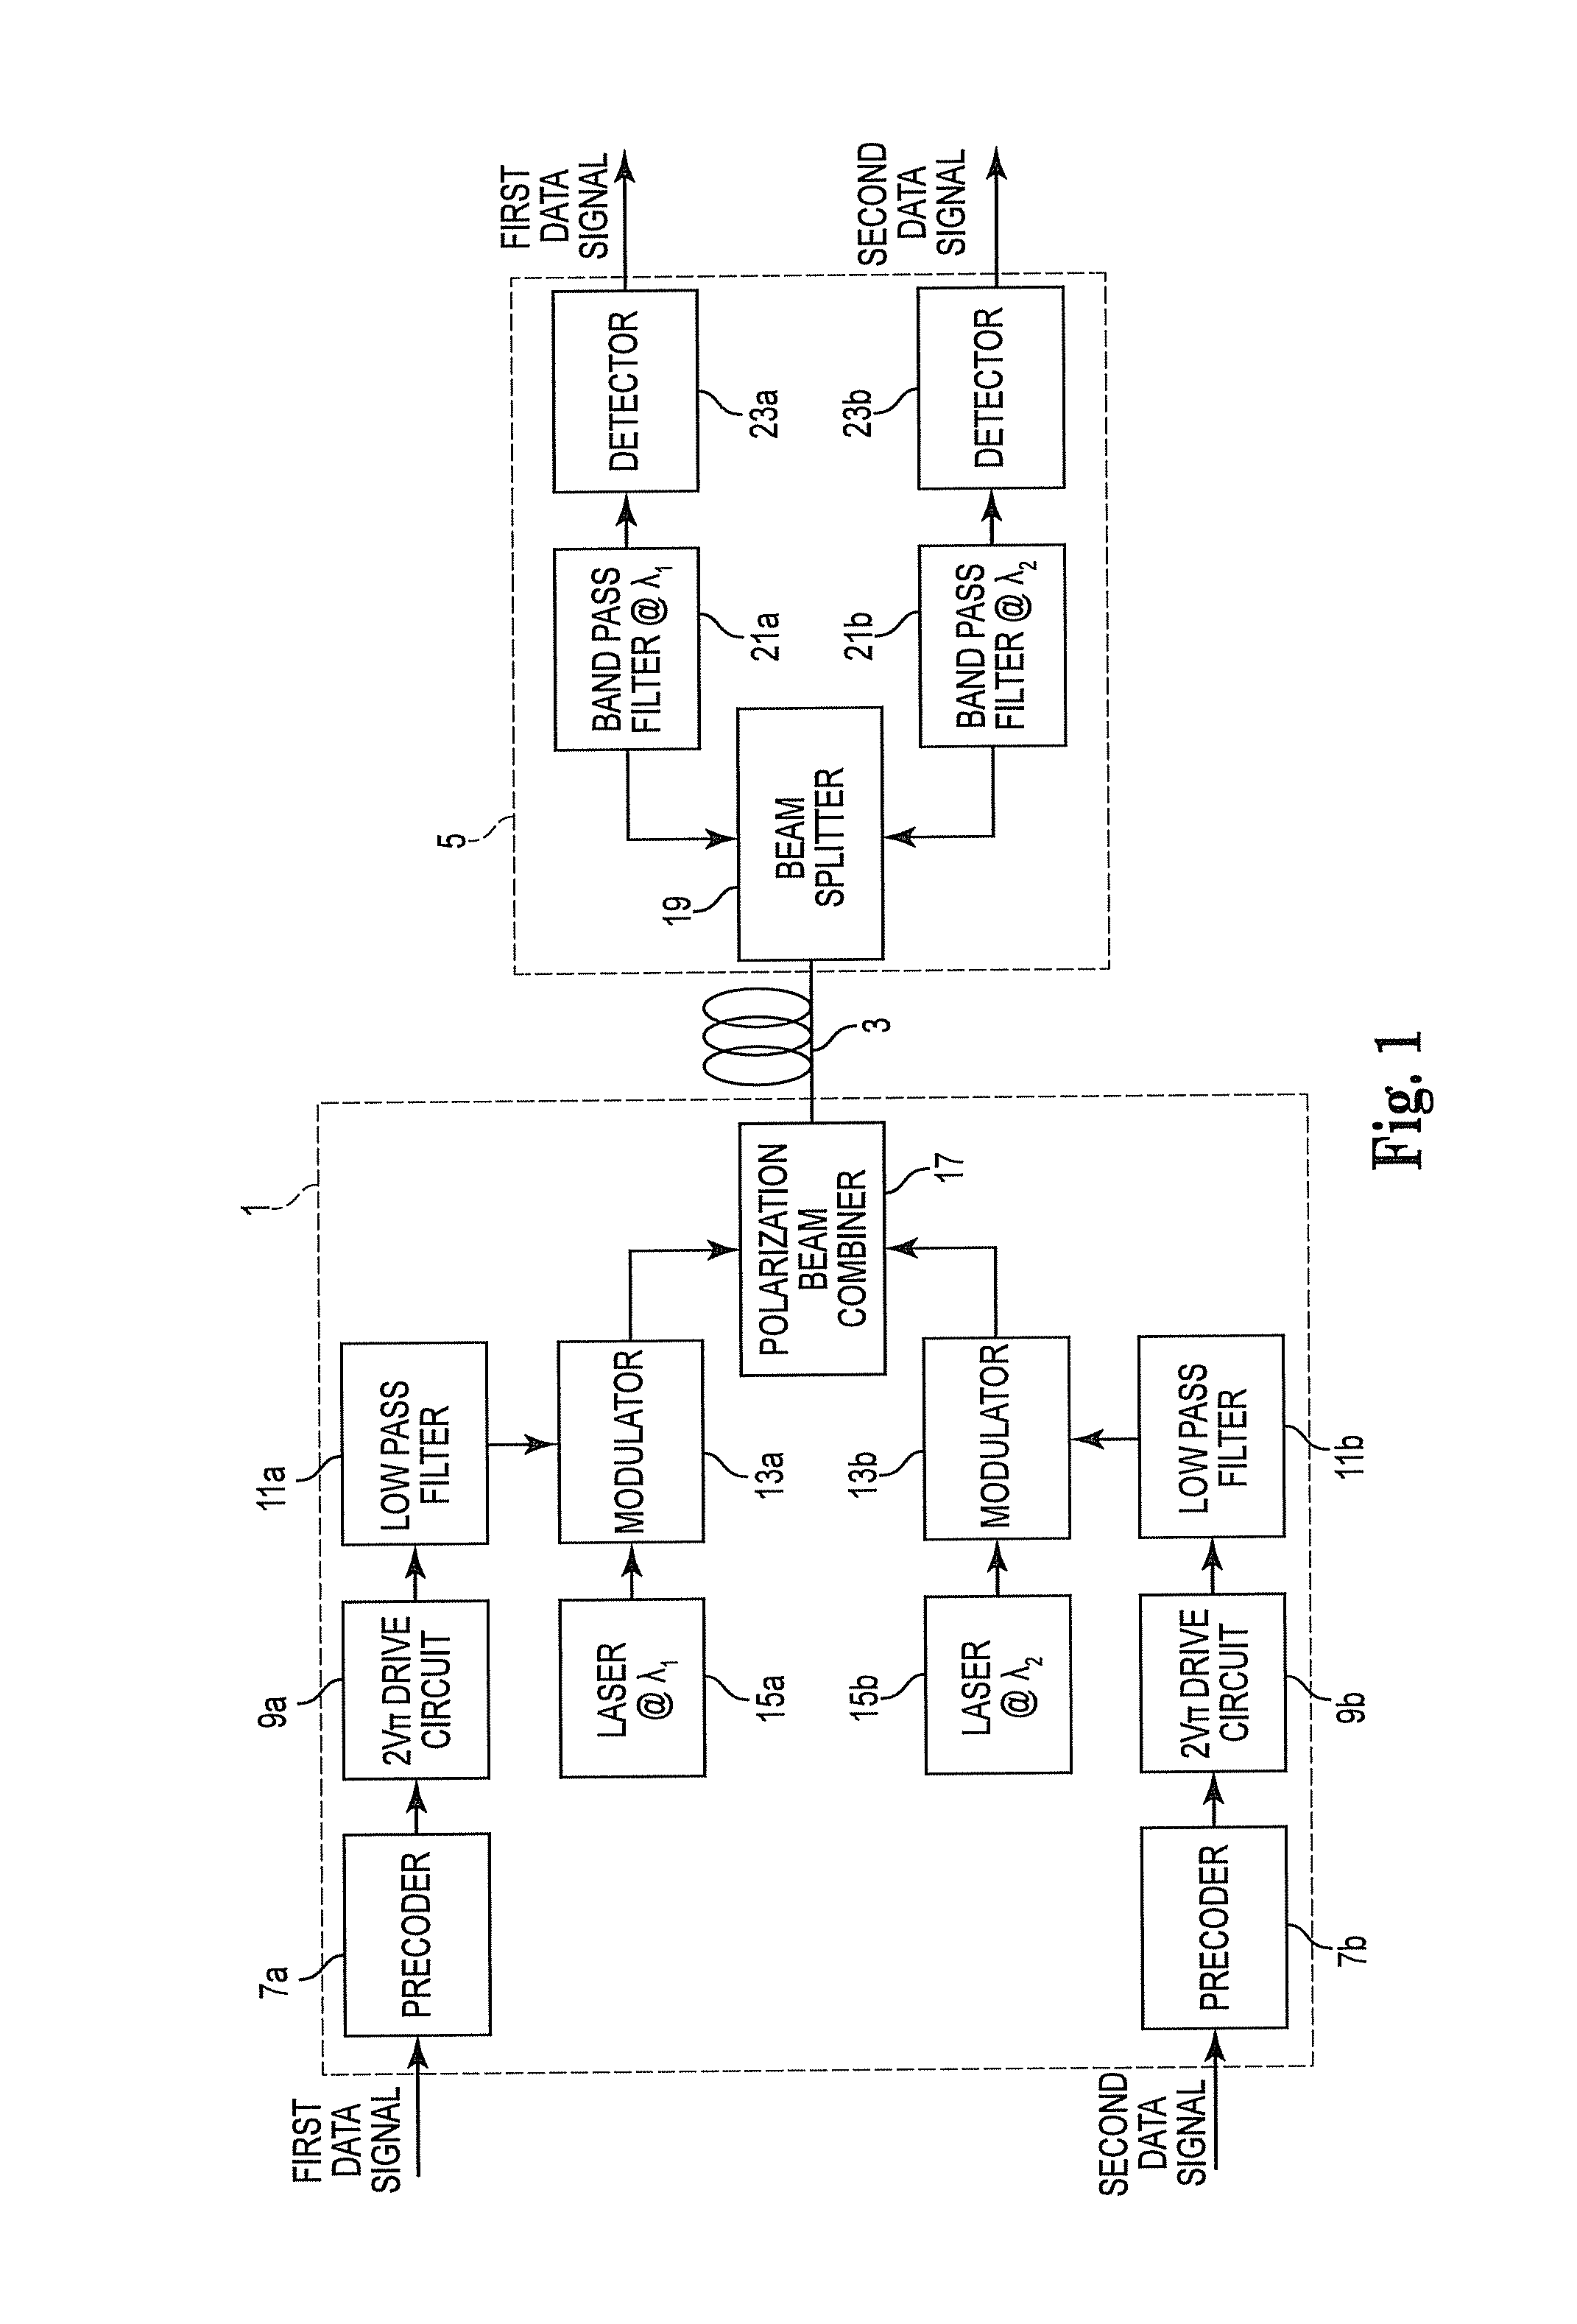 Optical communication system, and transmitter and receiver apparatus therefor